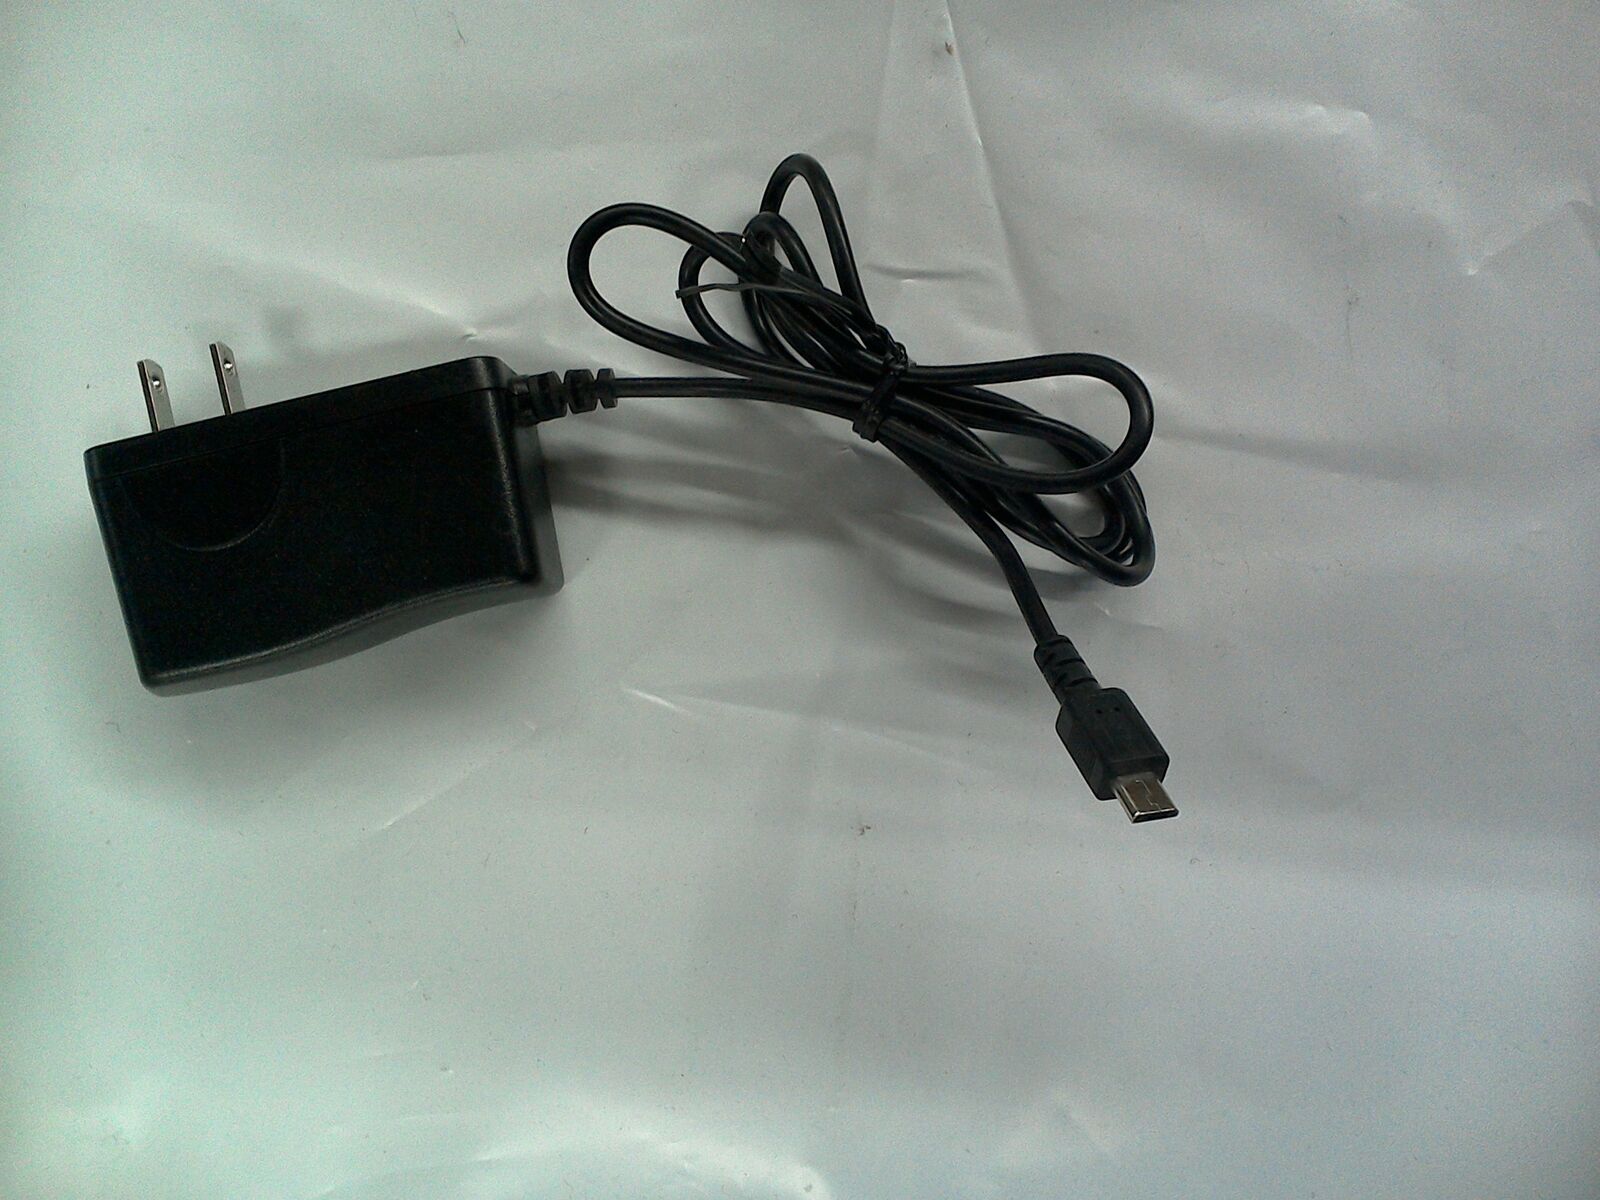 Original Dokocom STC-A0502000-Z (VERSION 2) Tablet Power Adapter Cable Co Brand: Dokocom Type: Power Adapter - Table